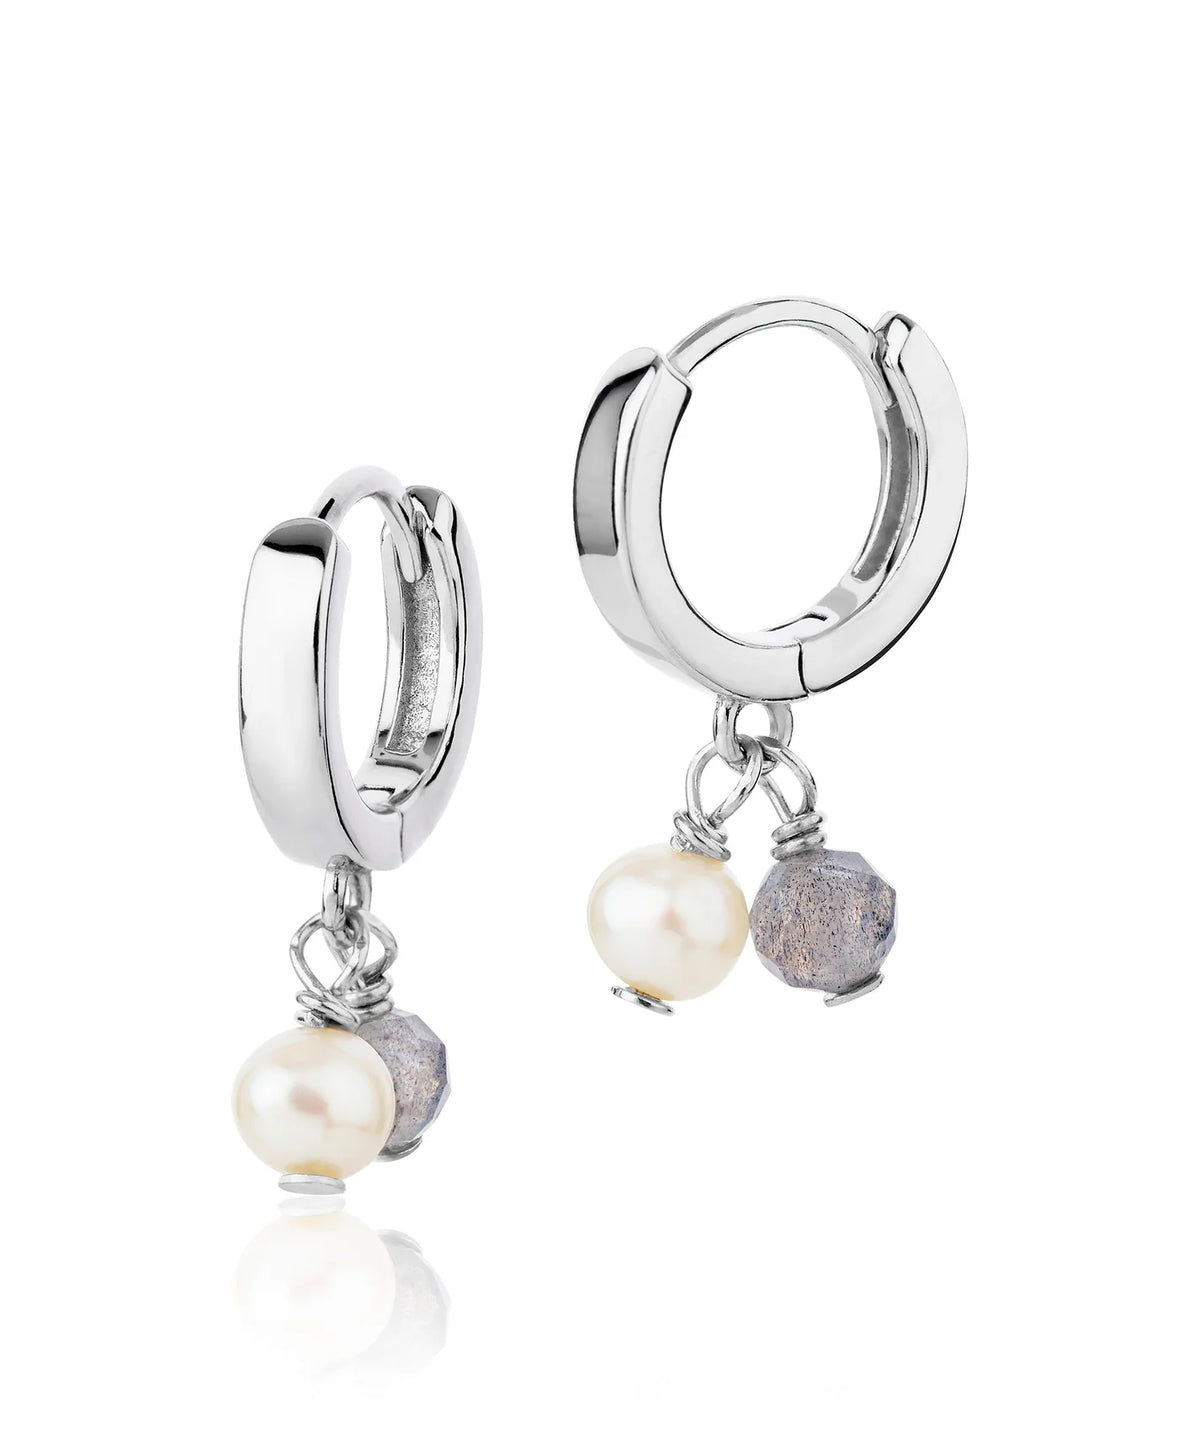 SIlver huggy earrings with pearl and grey stone charm